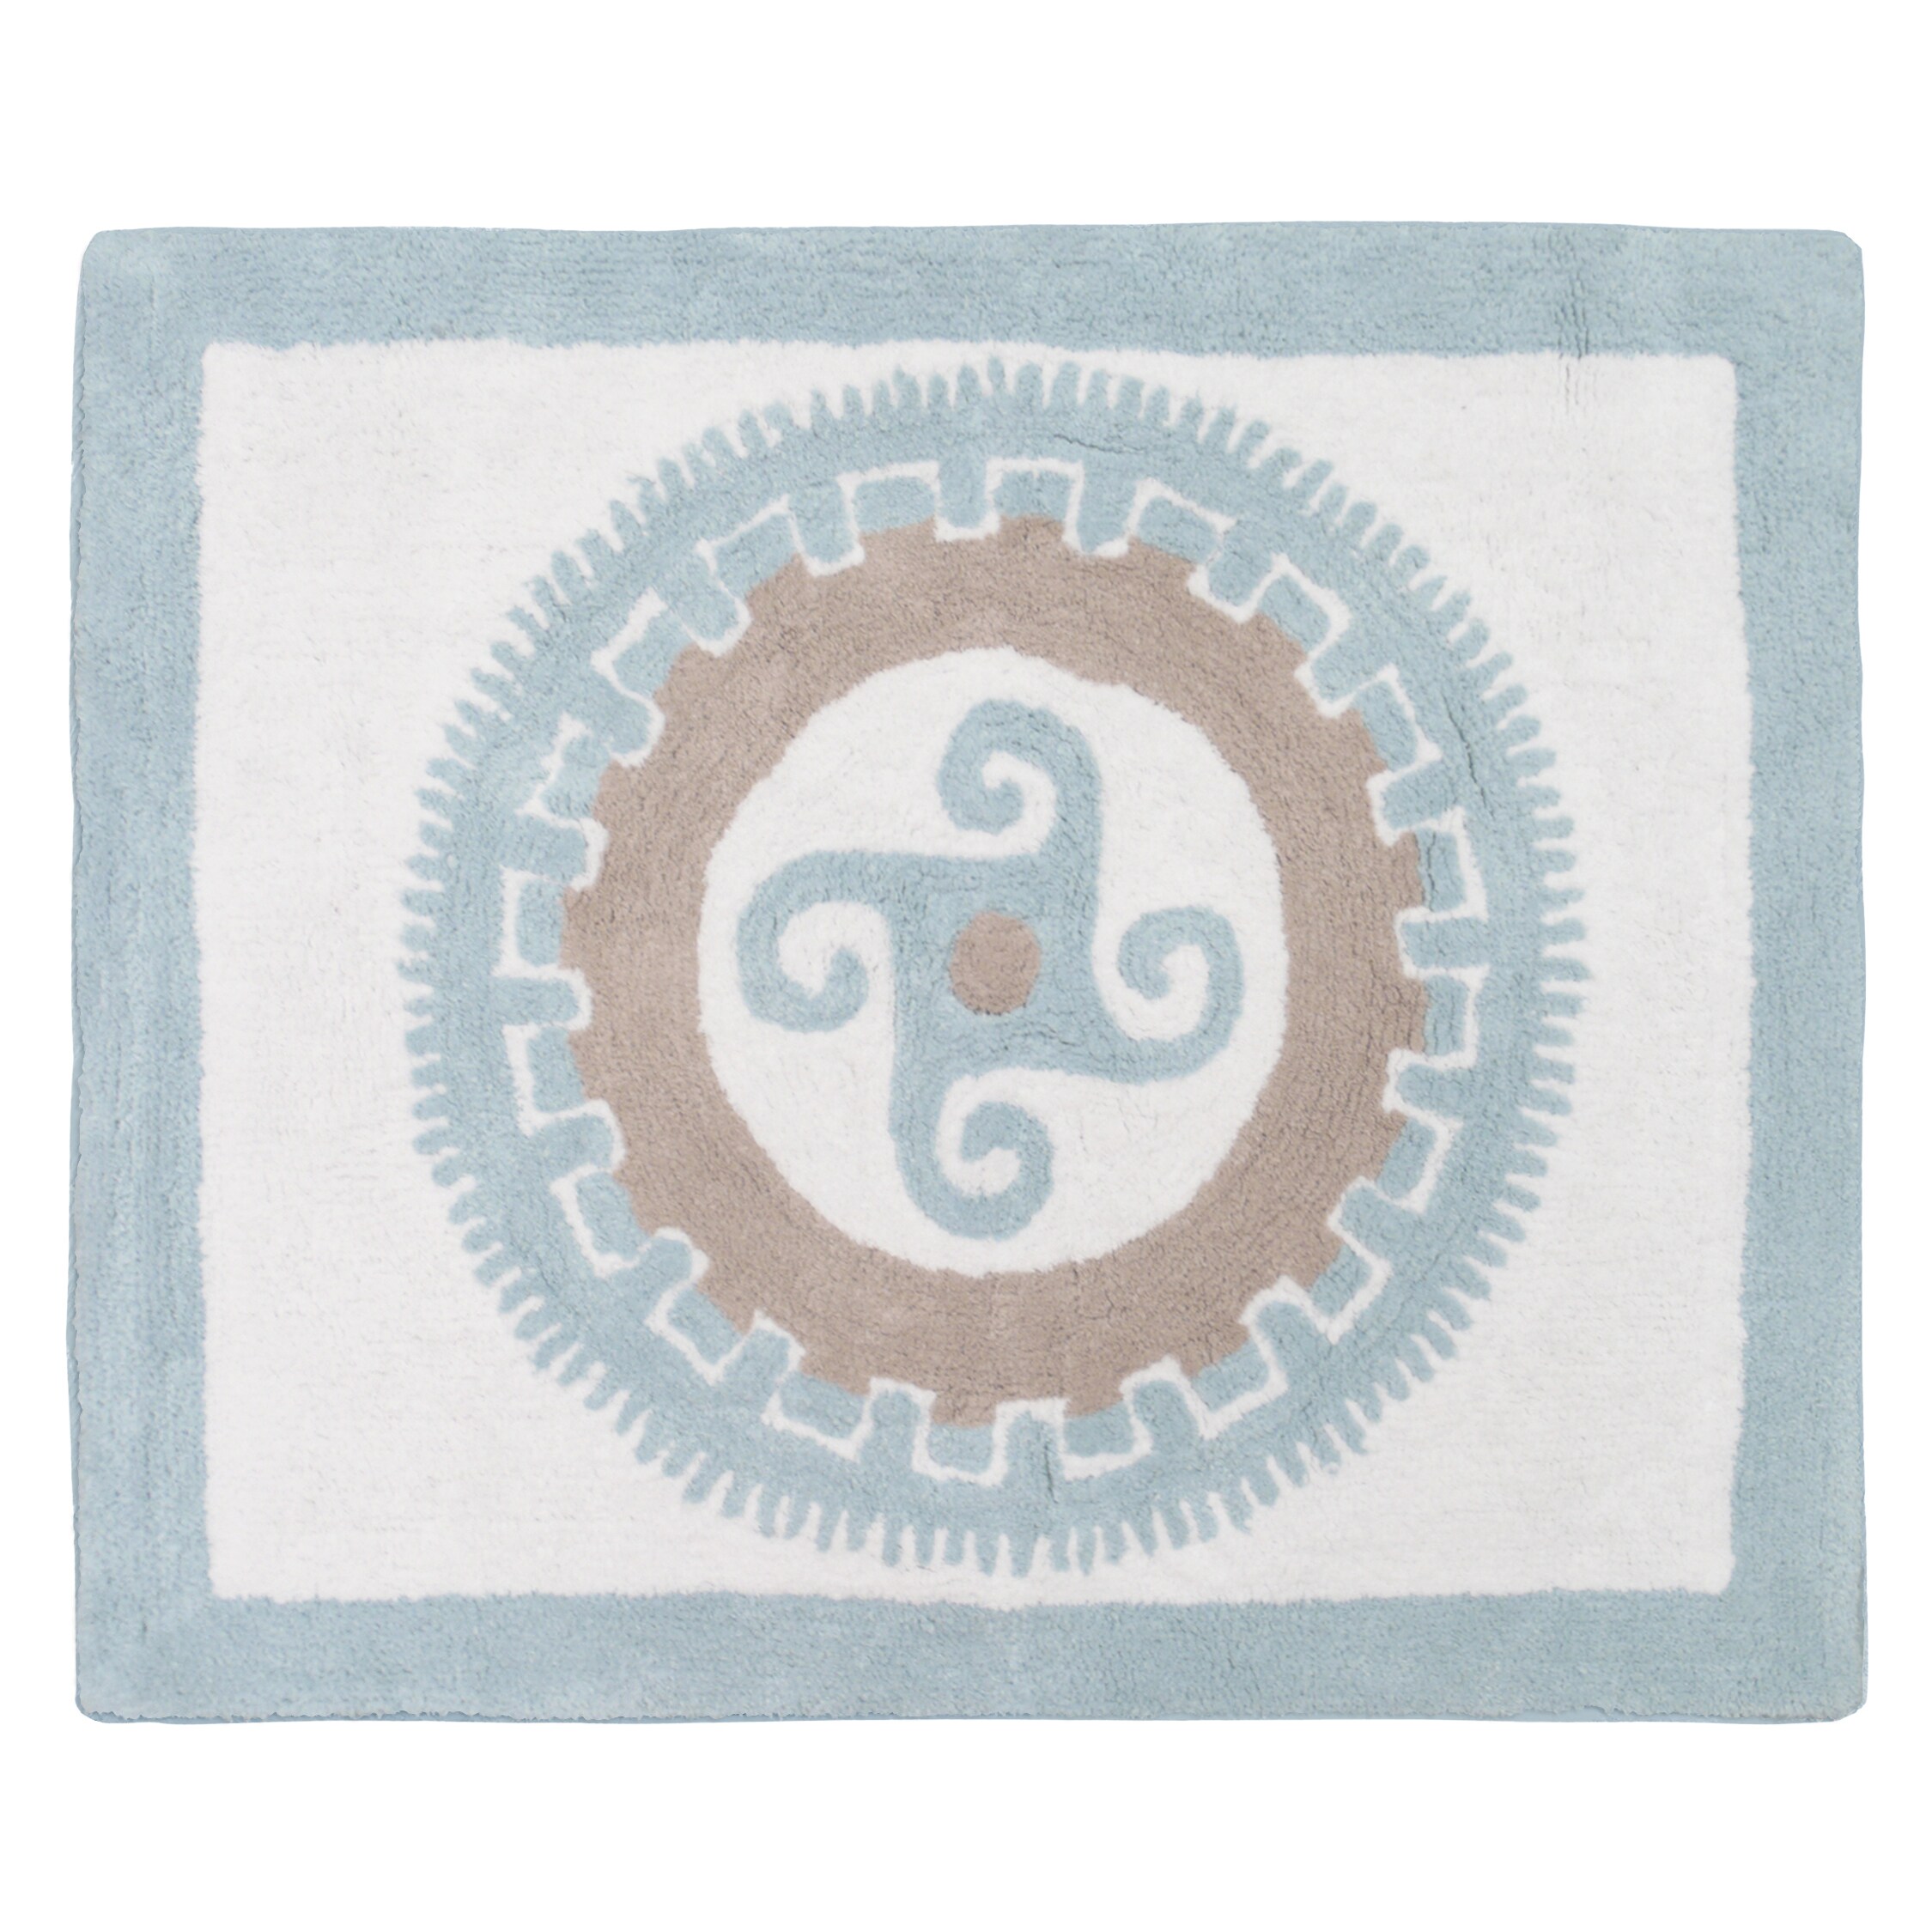 Sweet Jojo Designs Blue and Taupe Accent Floor Rug (2'6 x 3') Bed Bath   Beyond 9544366